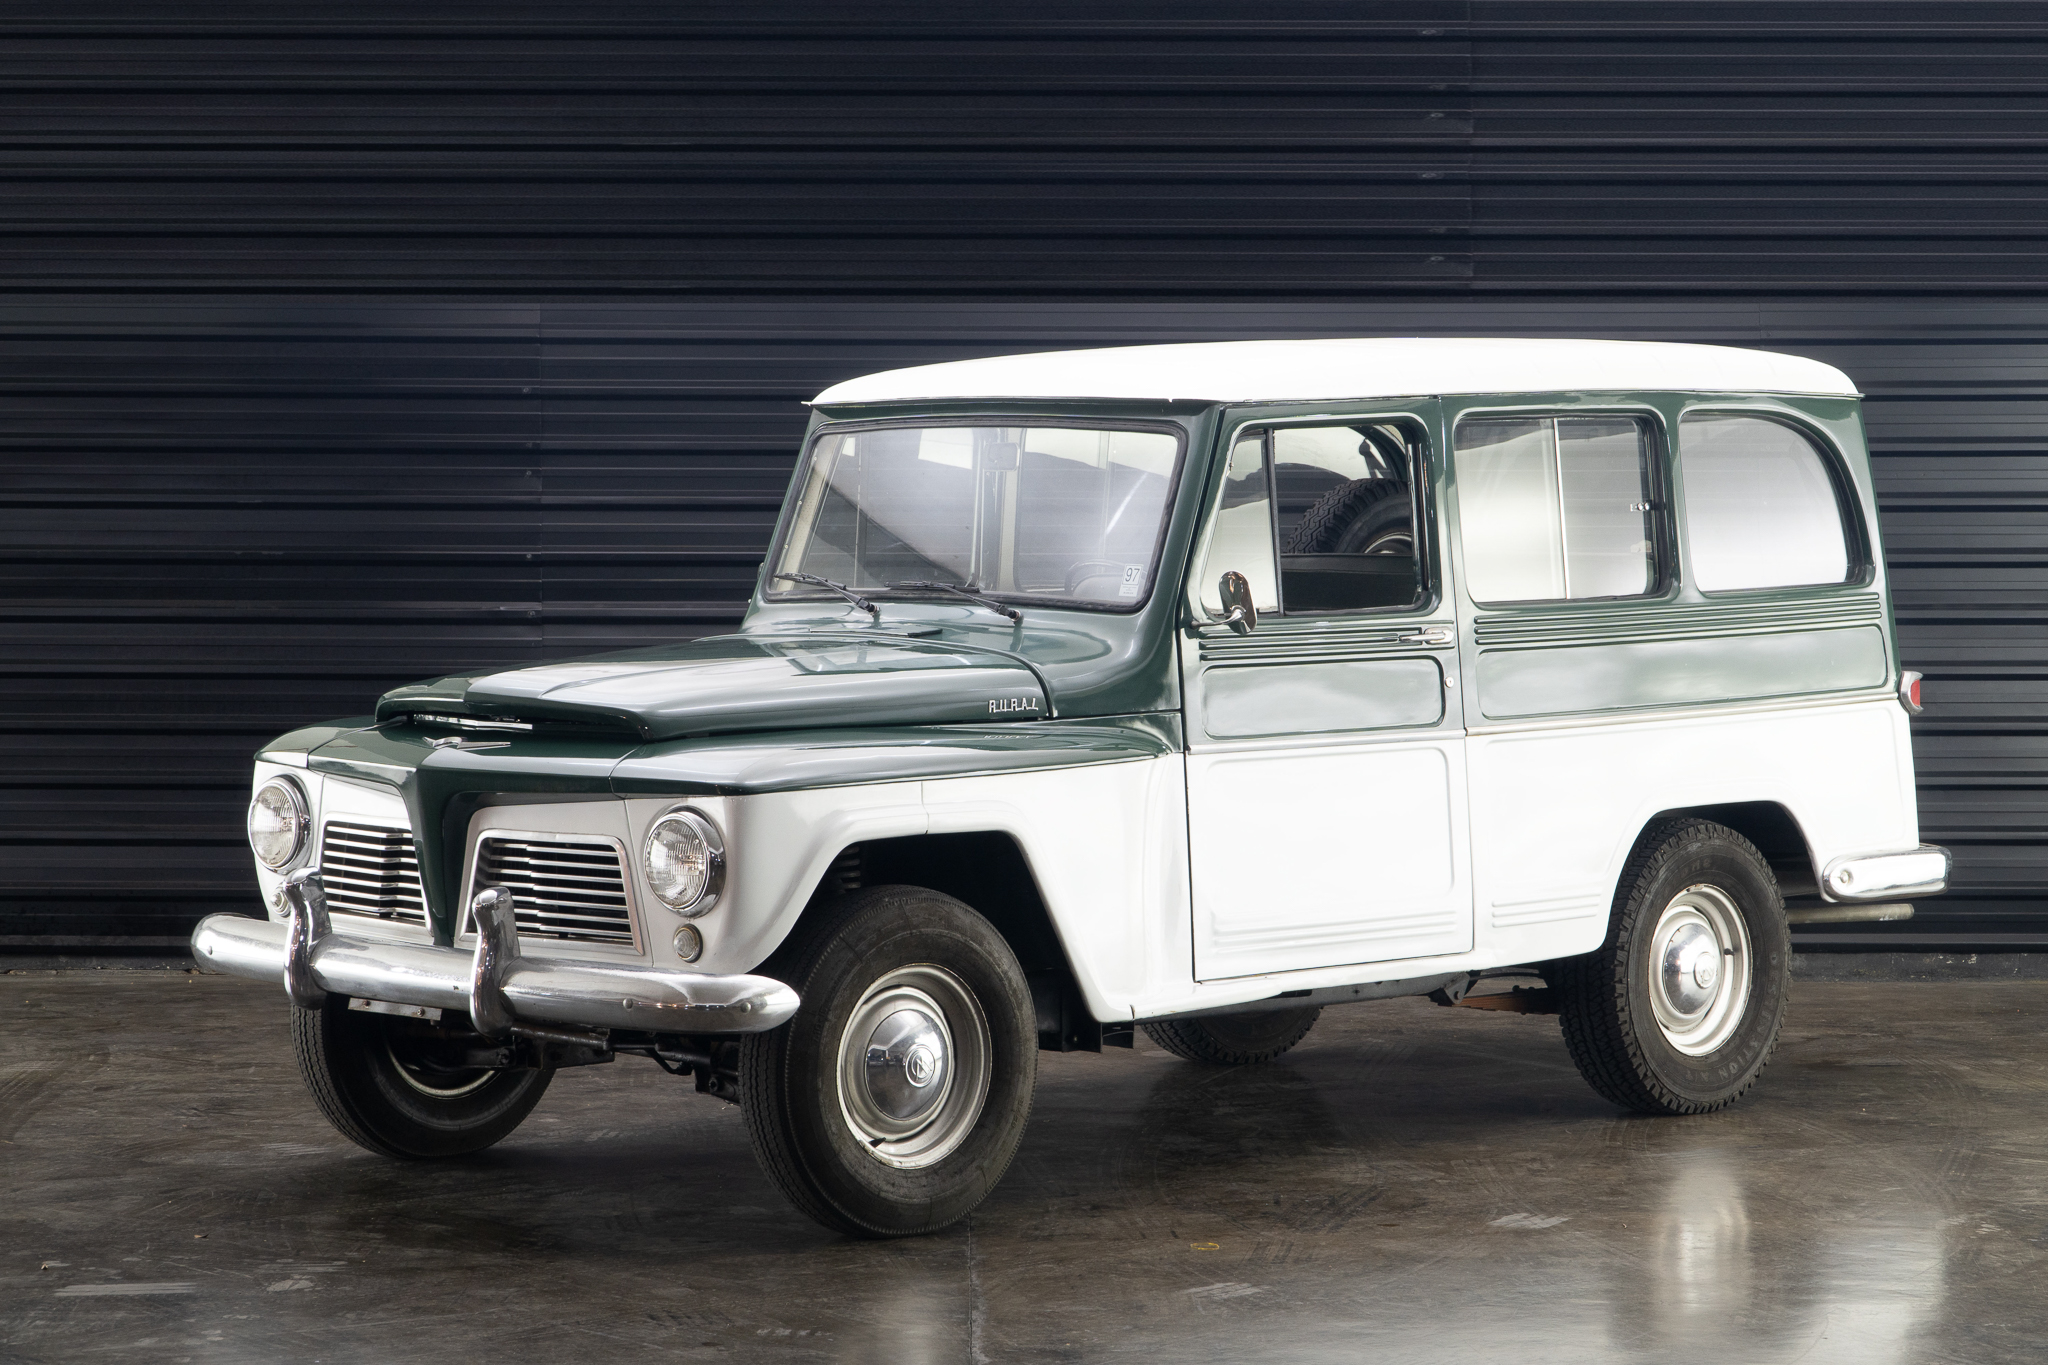 1966 Ford Rural Willys a venda for sale the garage